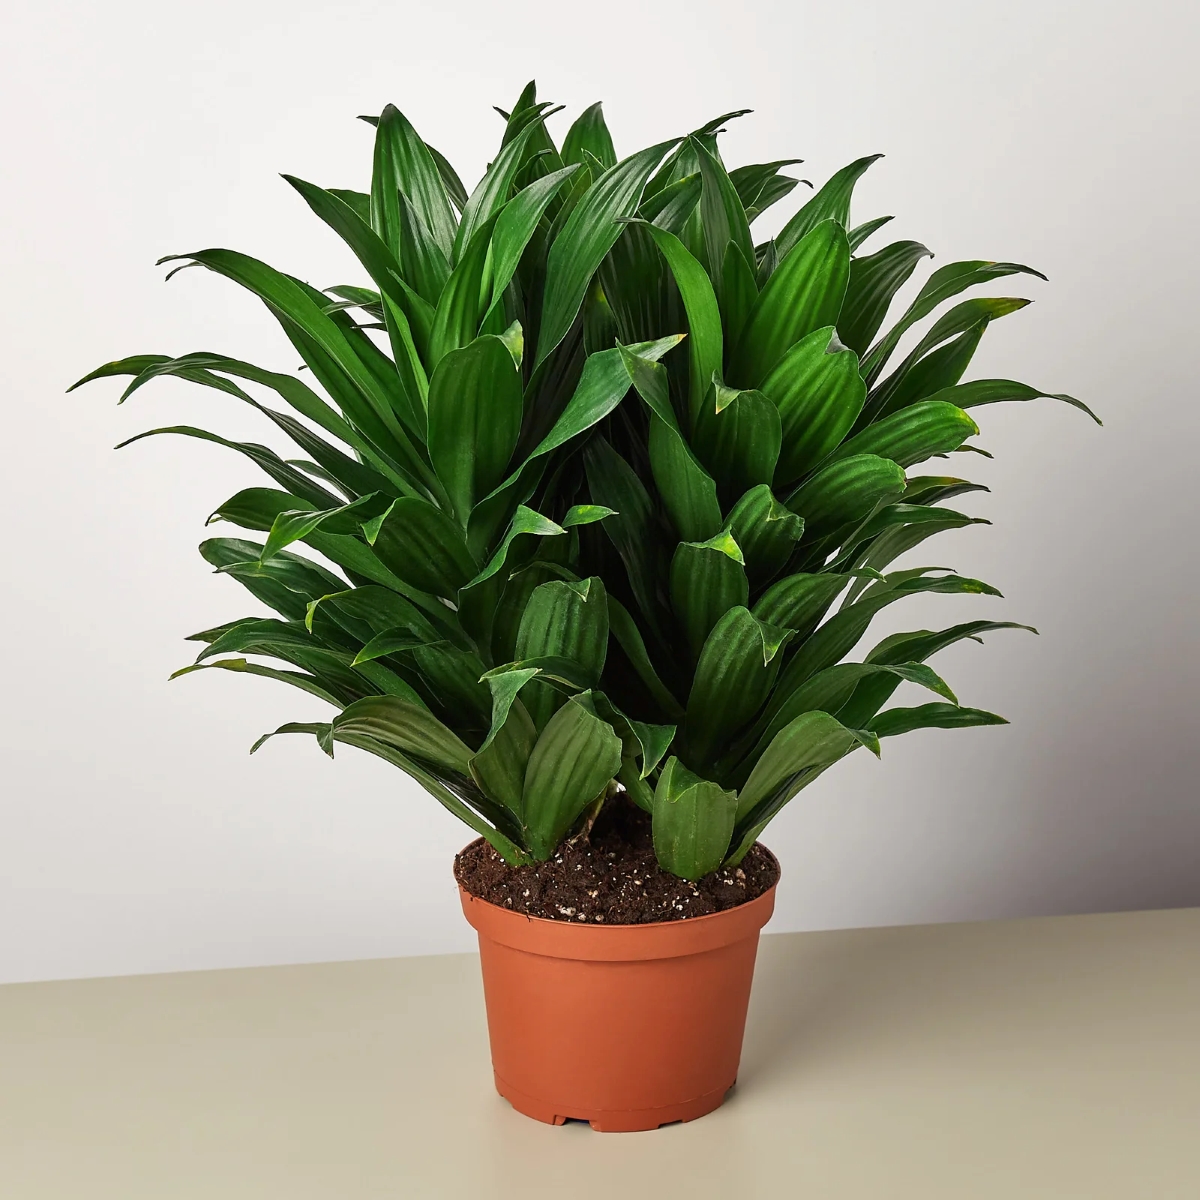 Potted Dracaena plant with bushy green leaves